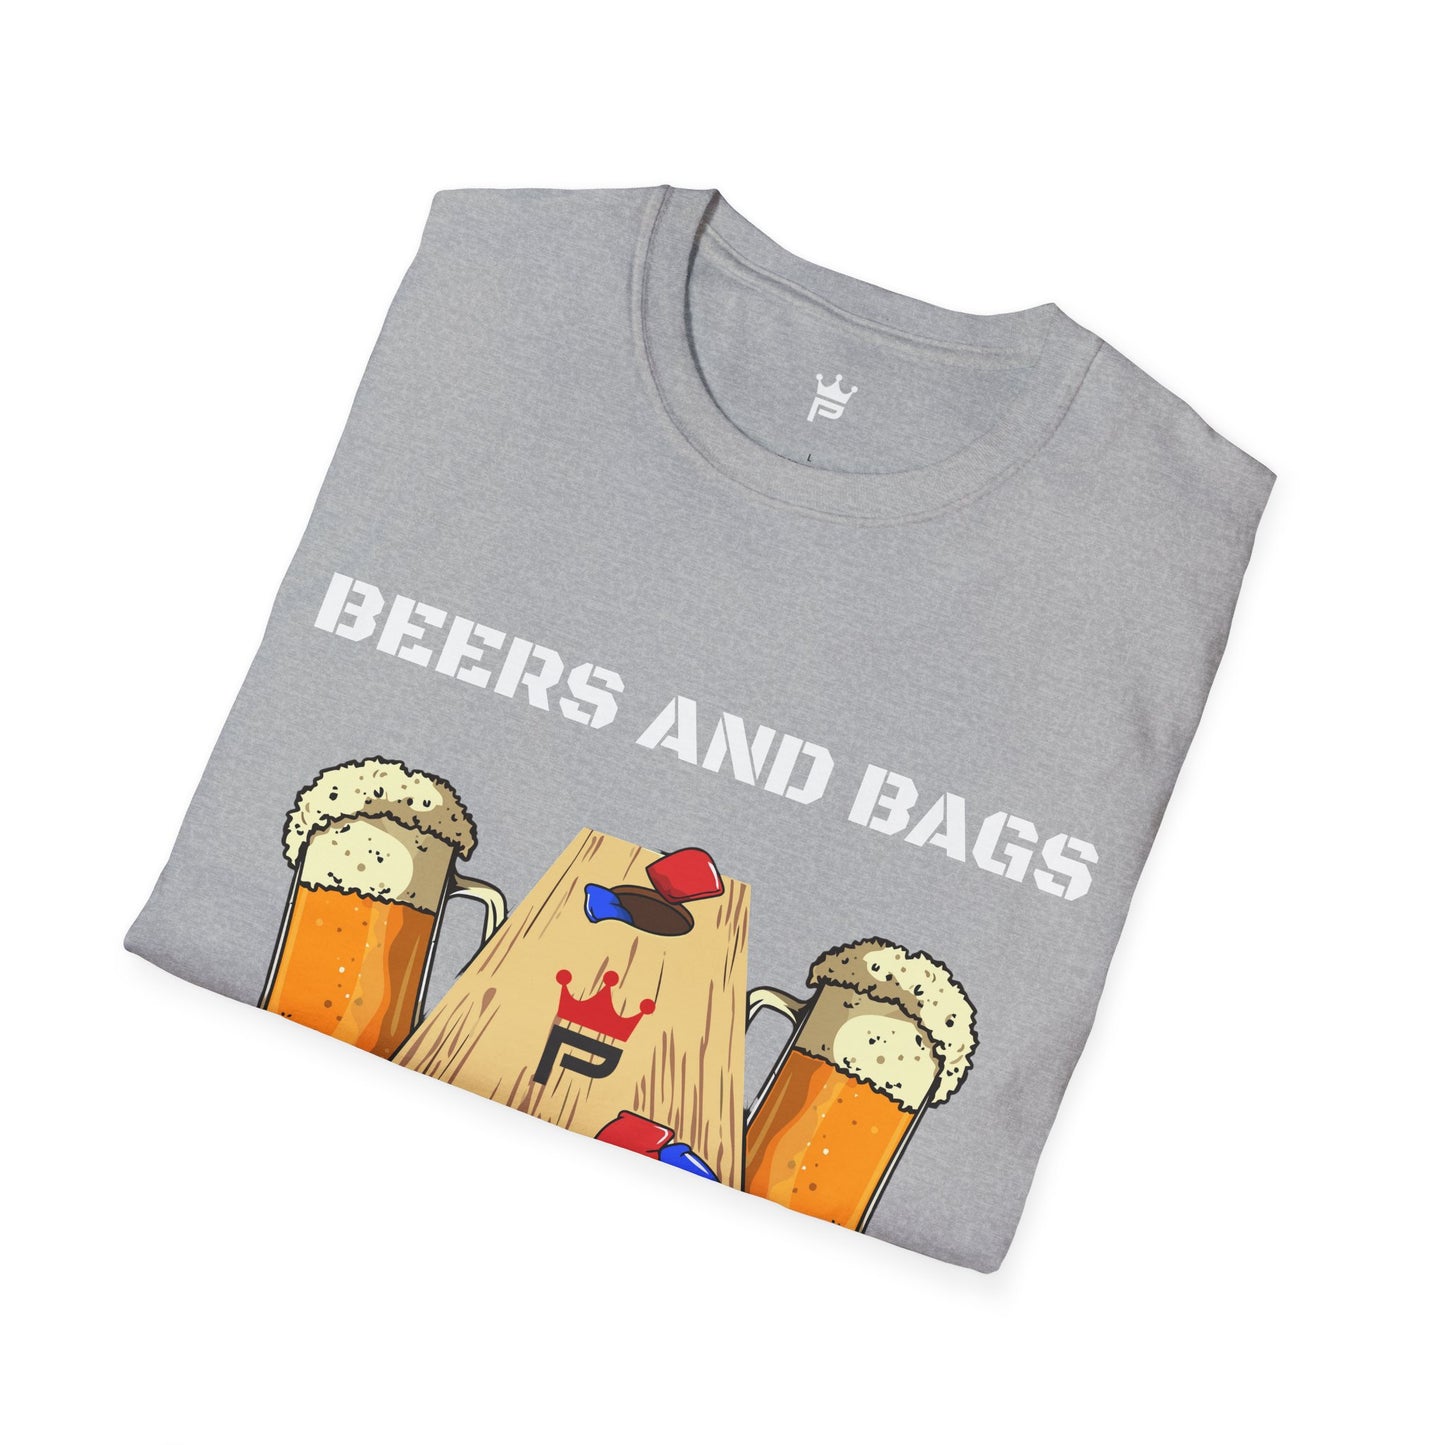 BEERS AND BAGS T-SHIRT